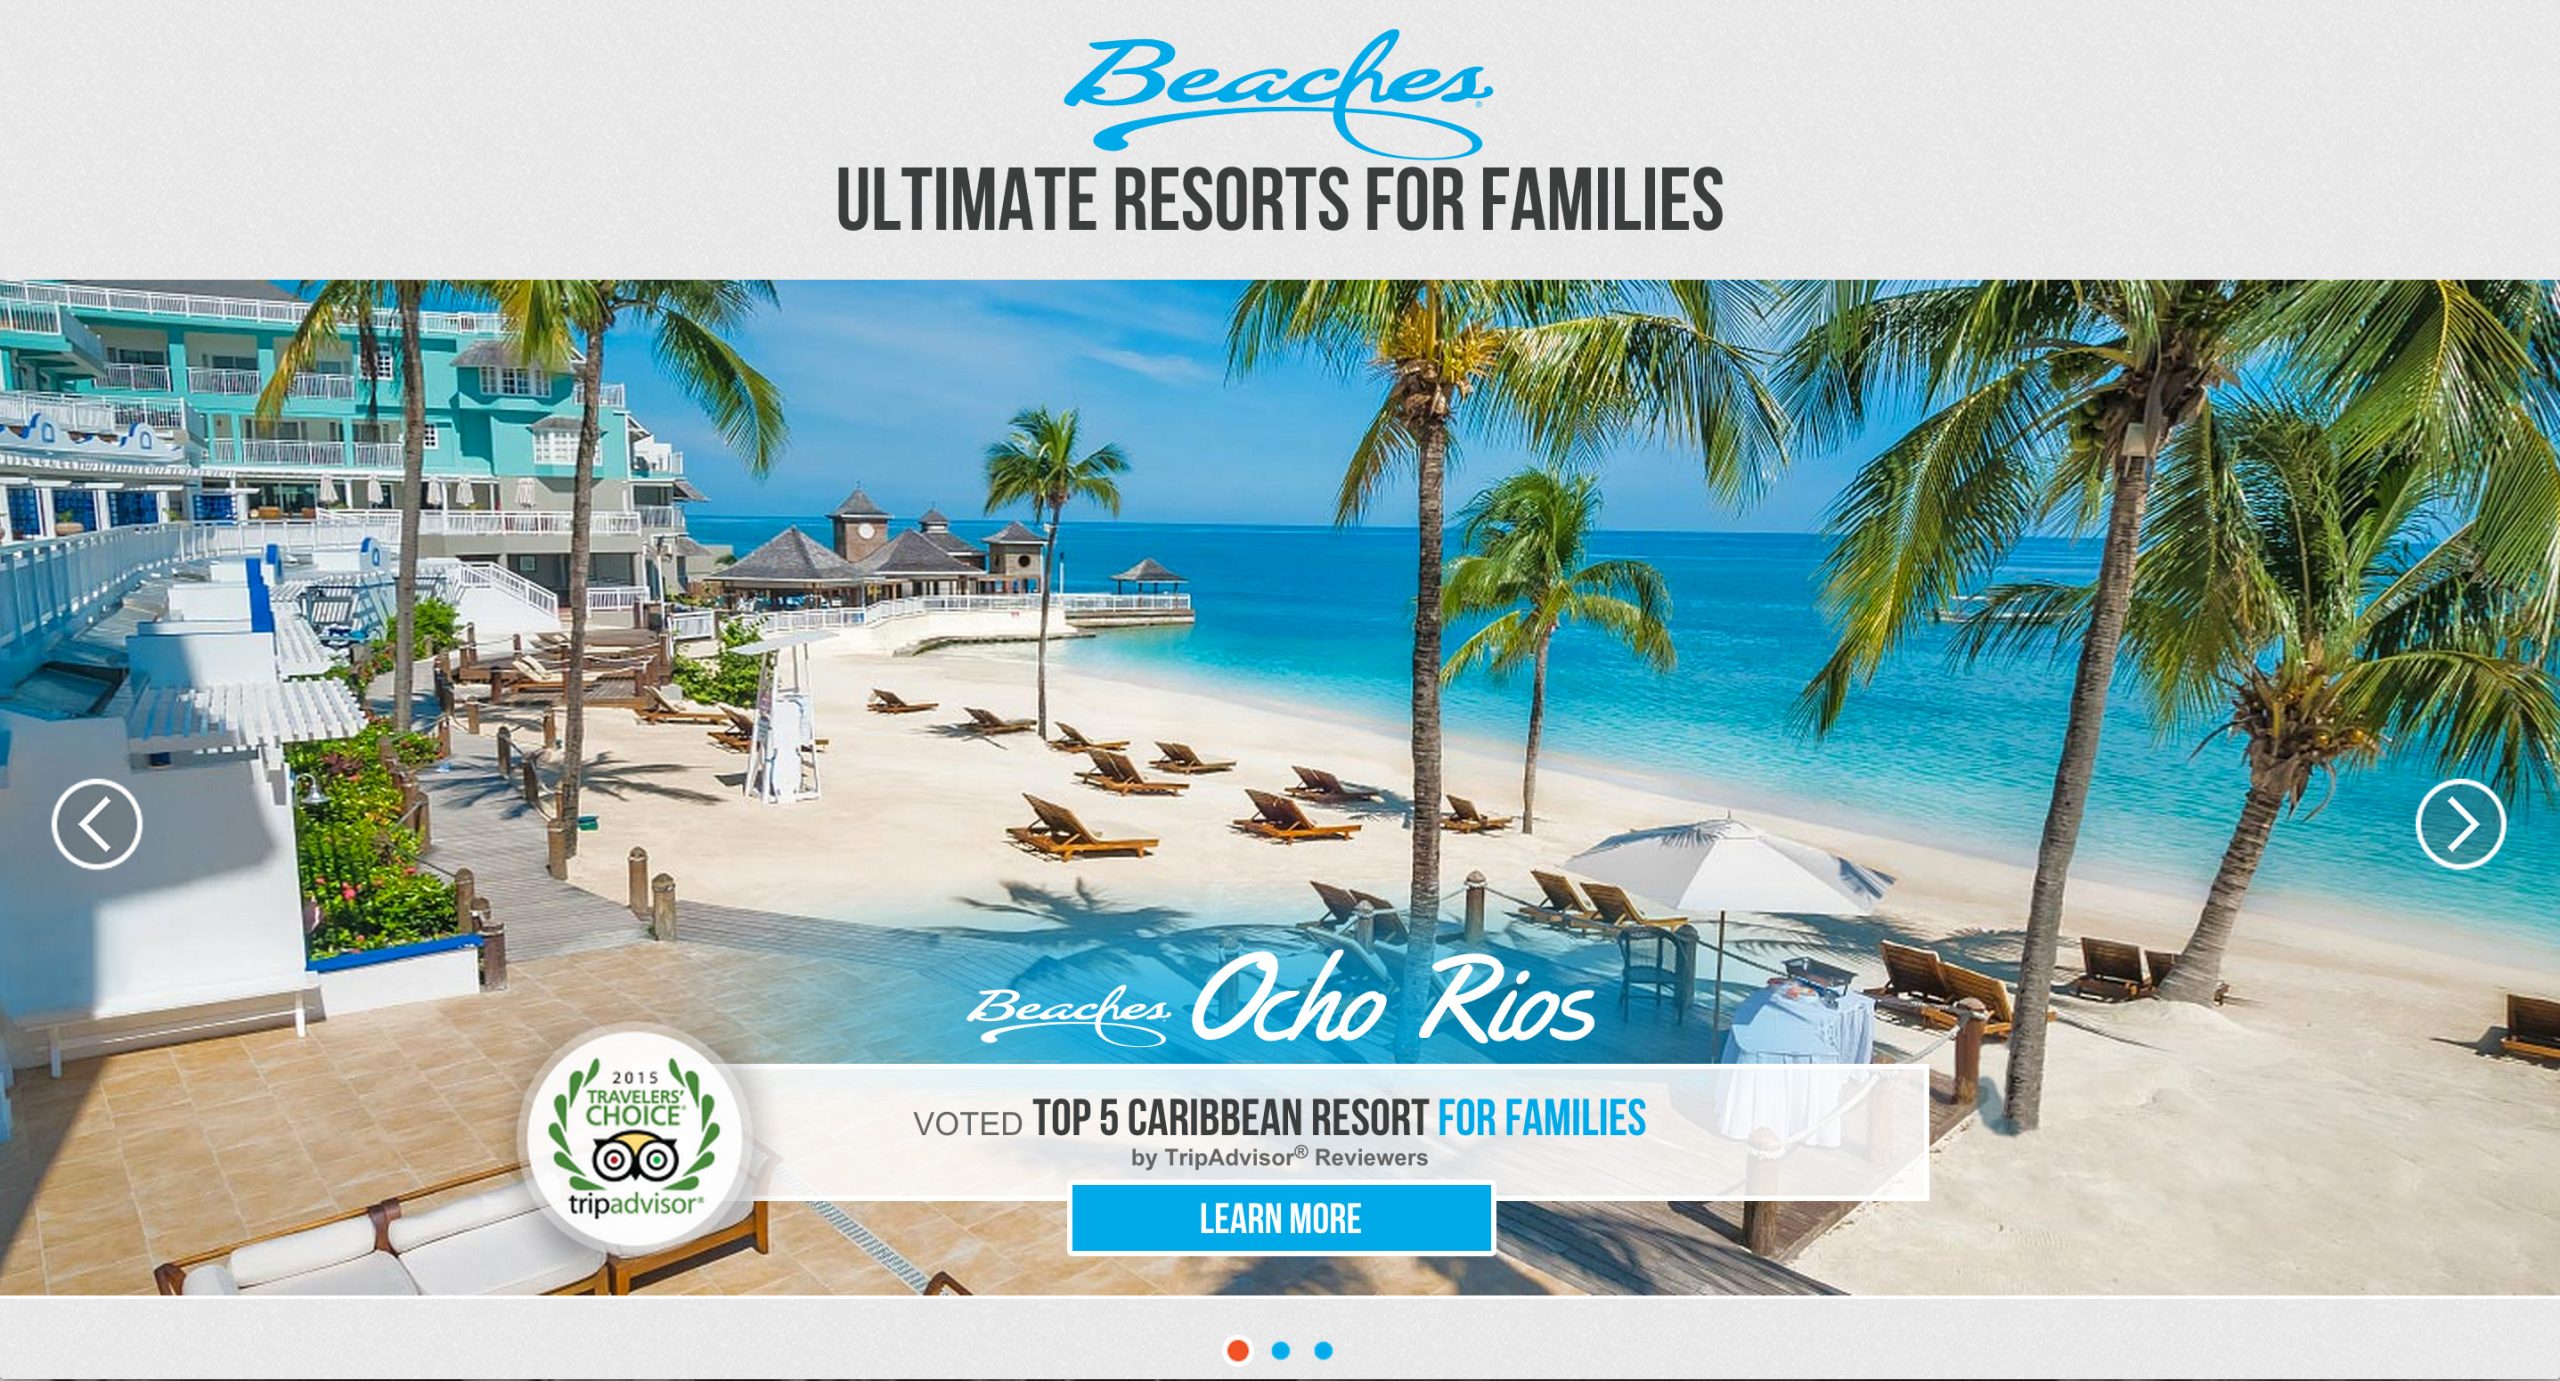 Like any other company, Beaches, an all-inclusive chain of resorts for families, must explain what its value proposition is to customers.In other words, why does a Beaches resort provide more value to vacationing families than do other resorts?